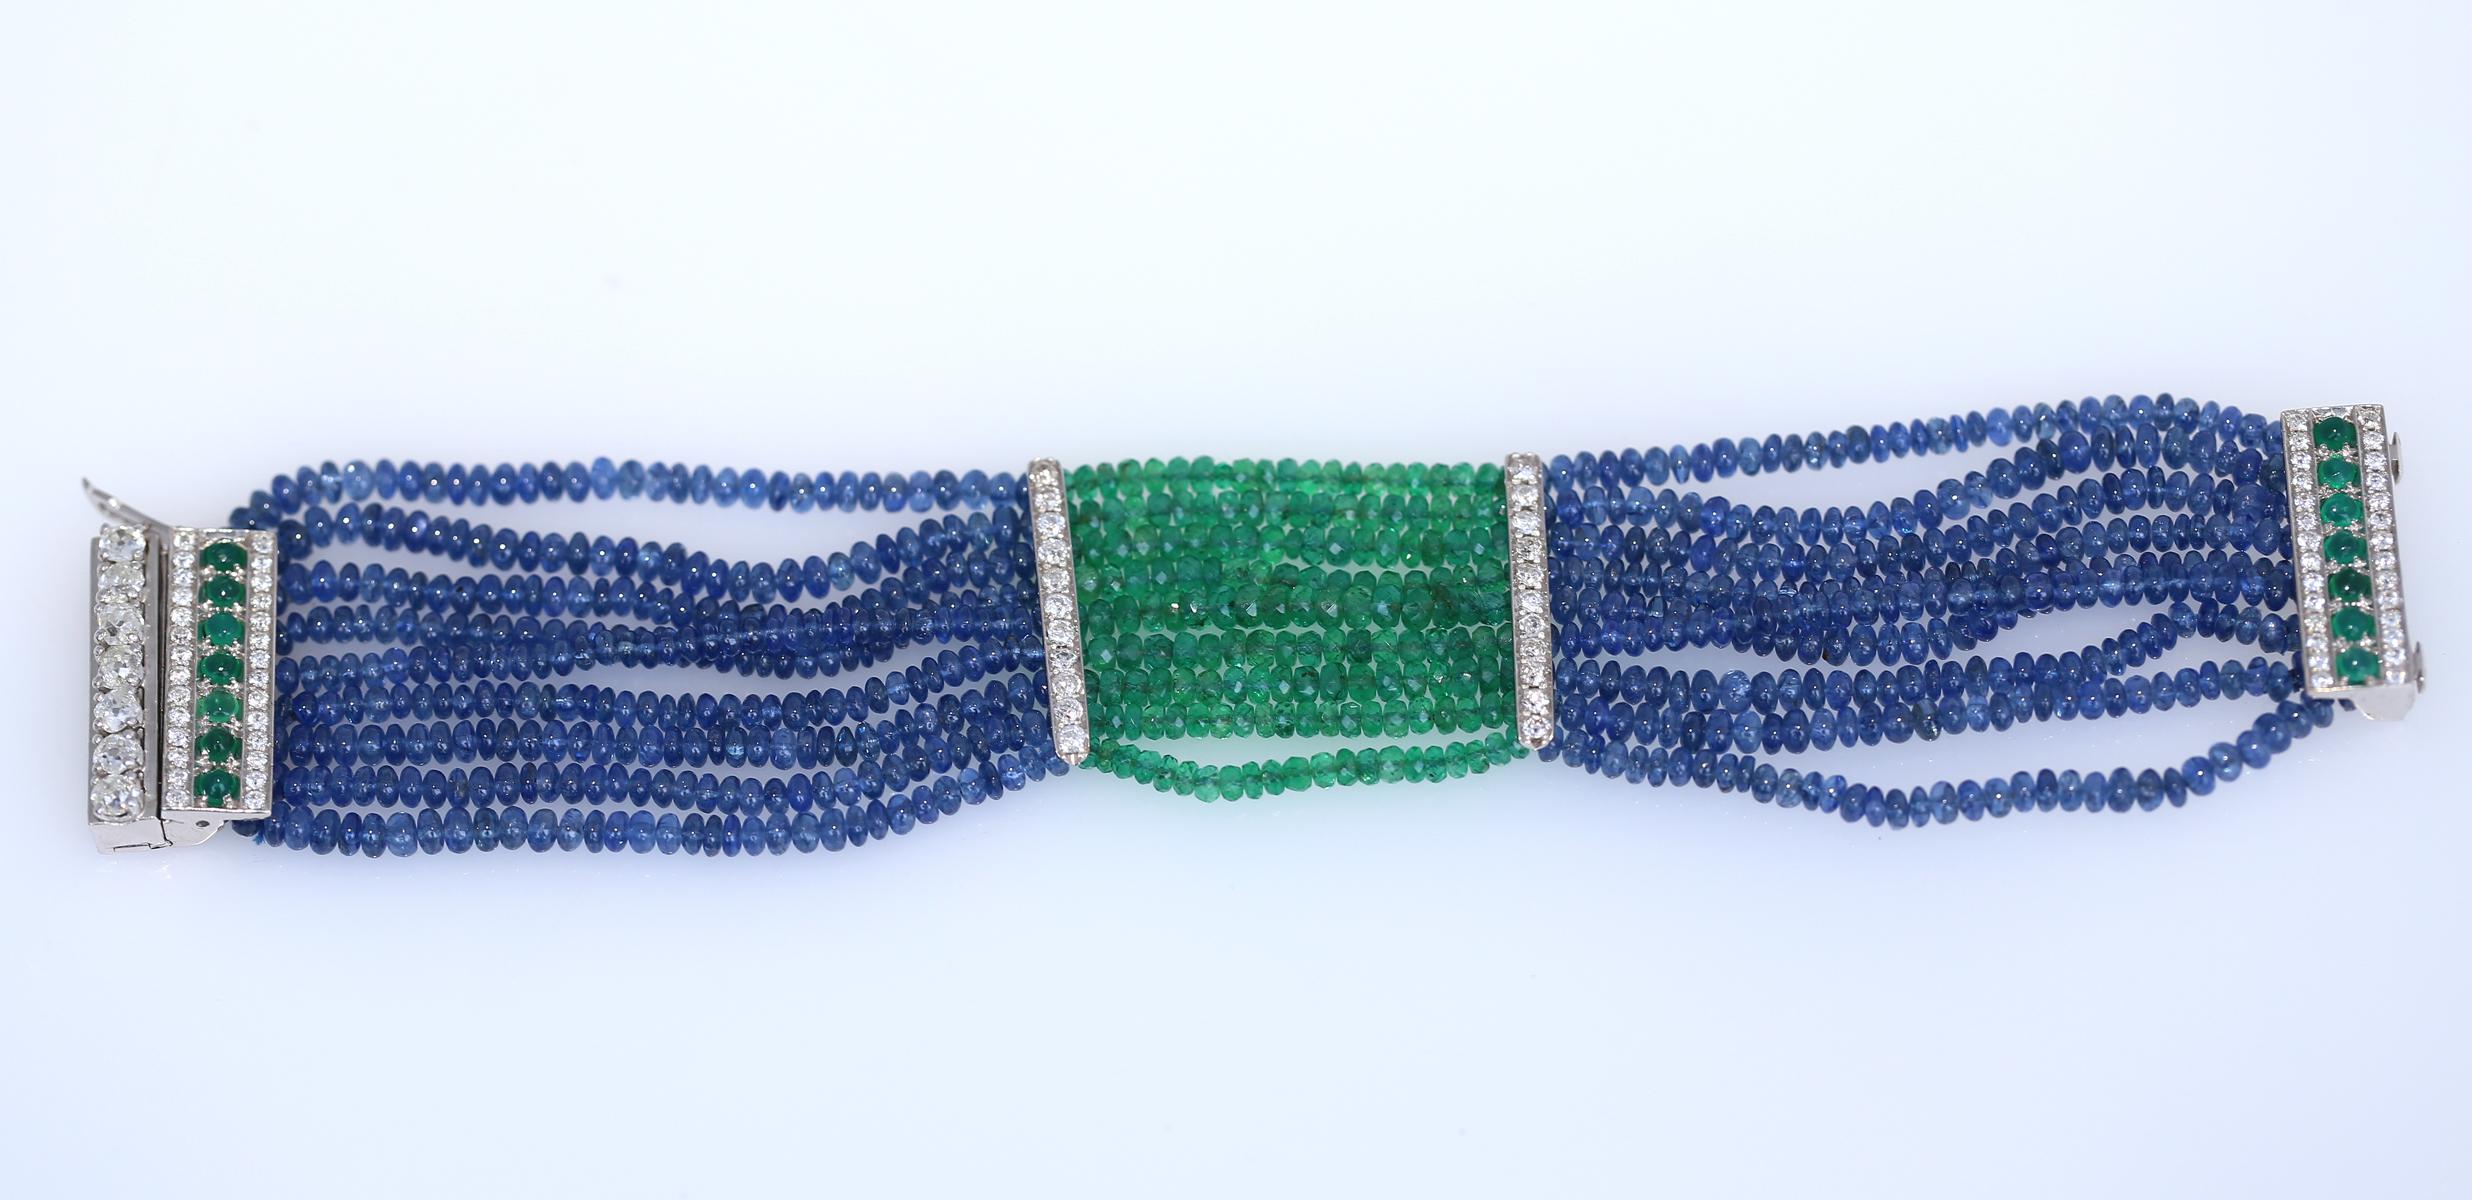 Emerald Sapphire and Diamonds Bracelet. Created in the 1970 es.
A multi-strand sapphire and emerald bracelet containing. Fine green-faceted emeralds. Sapphire beads. A line of fine round-cut Diamonds and cabochon Emeralds in the lock. Bright,